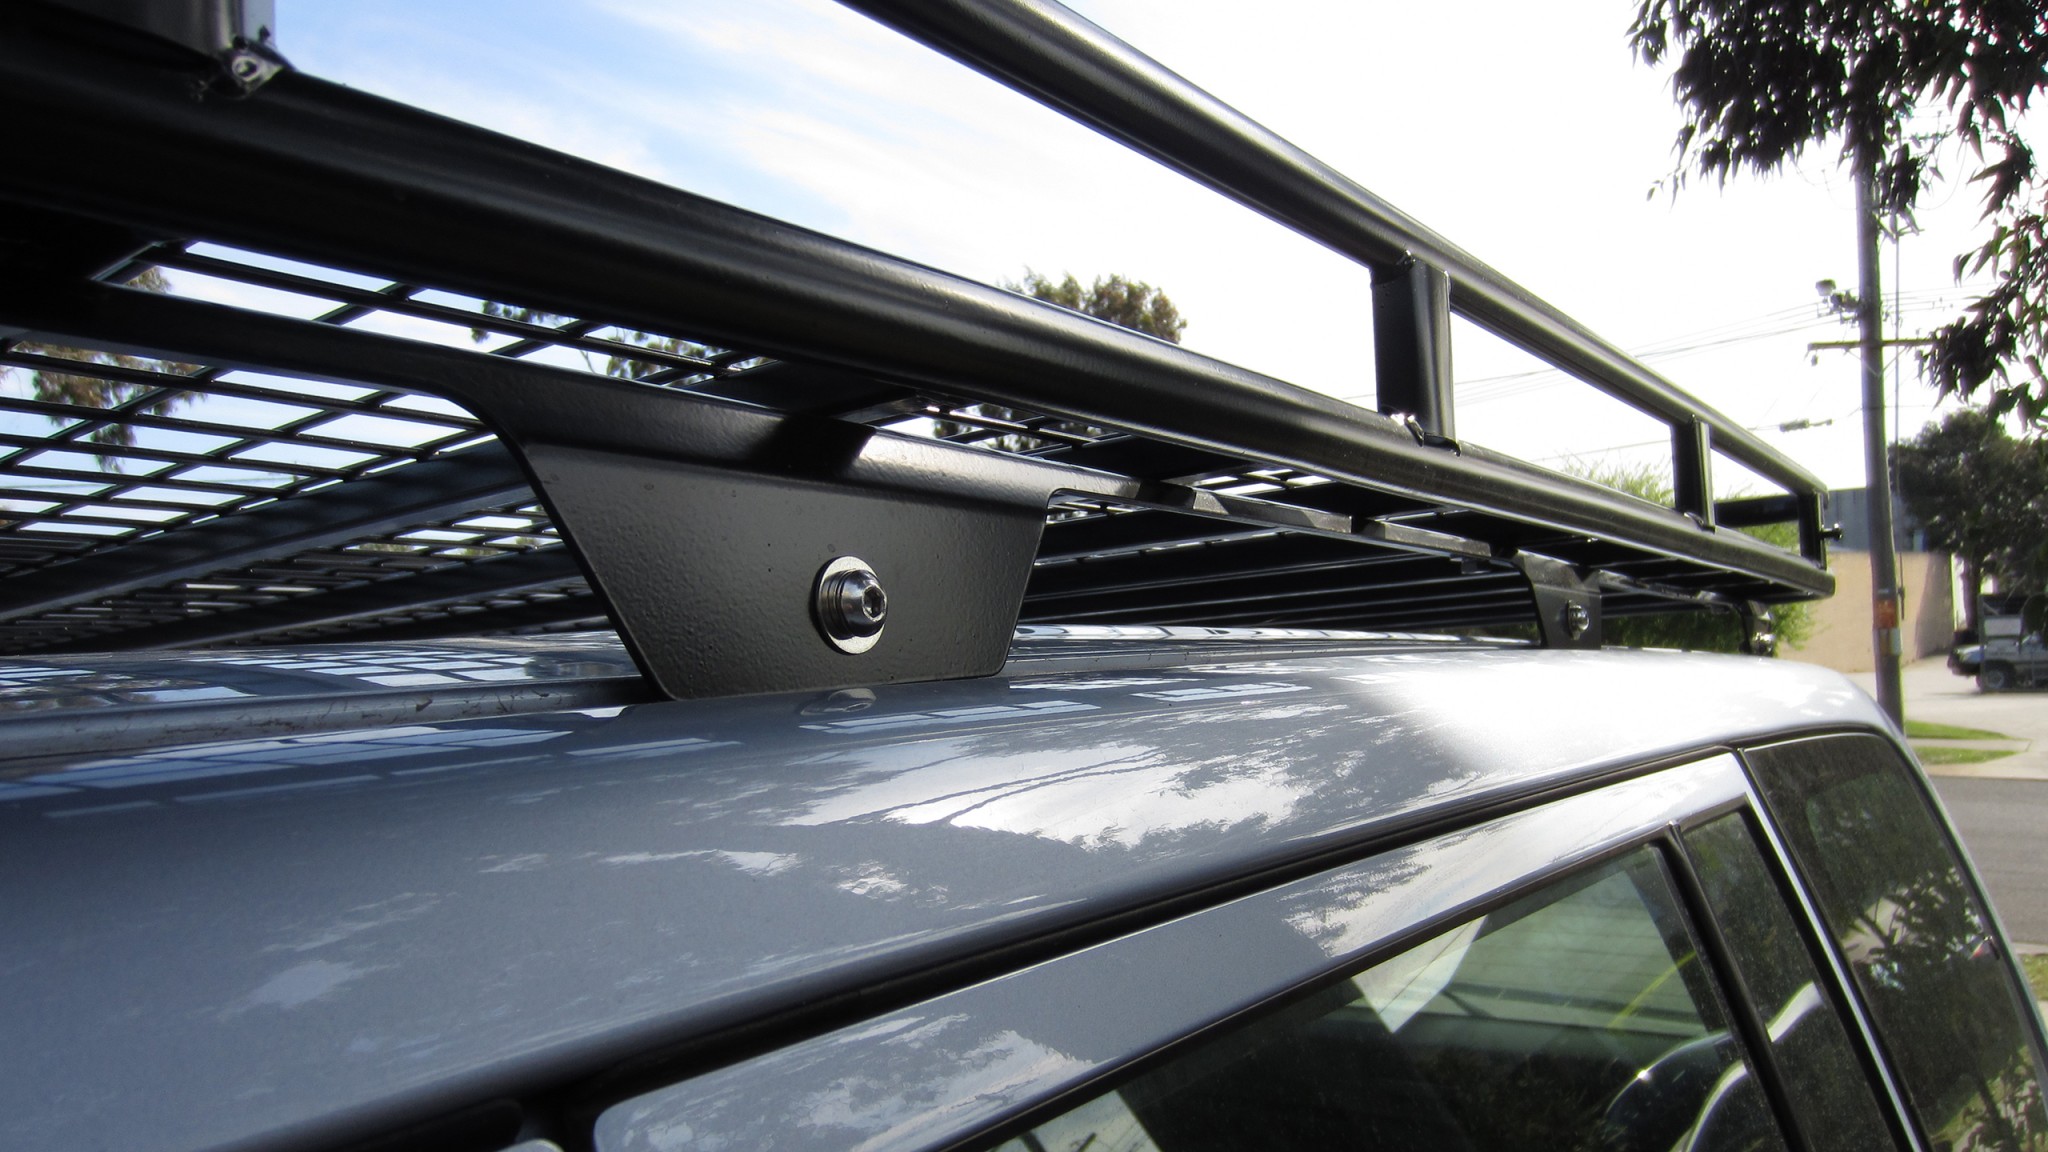 Great roof rack for Toyota, i think it